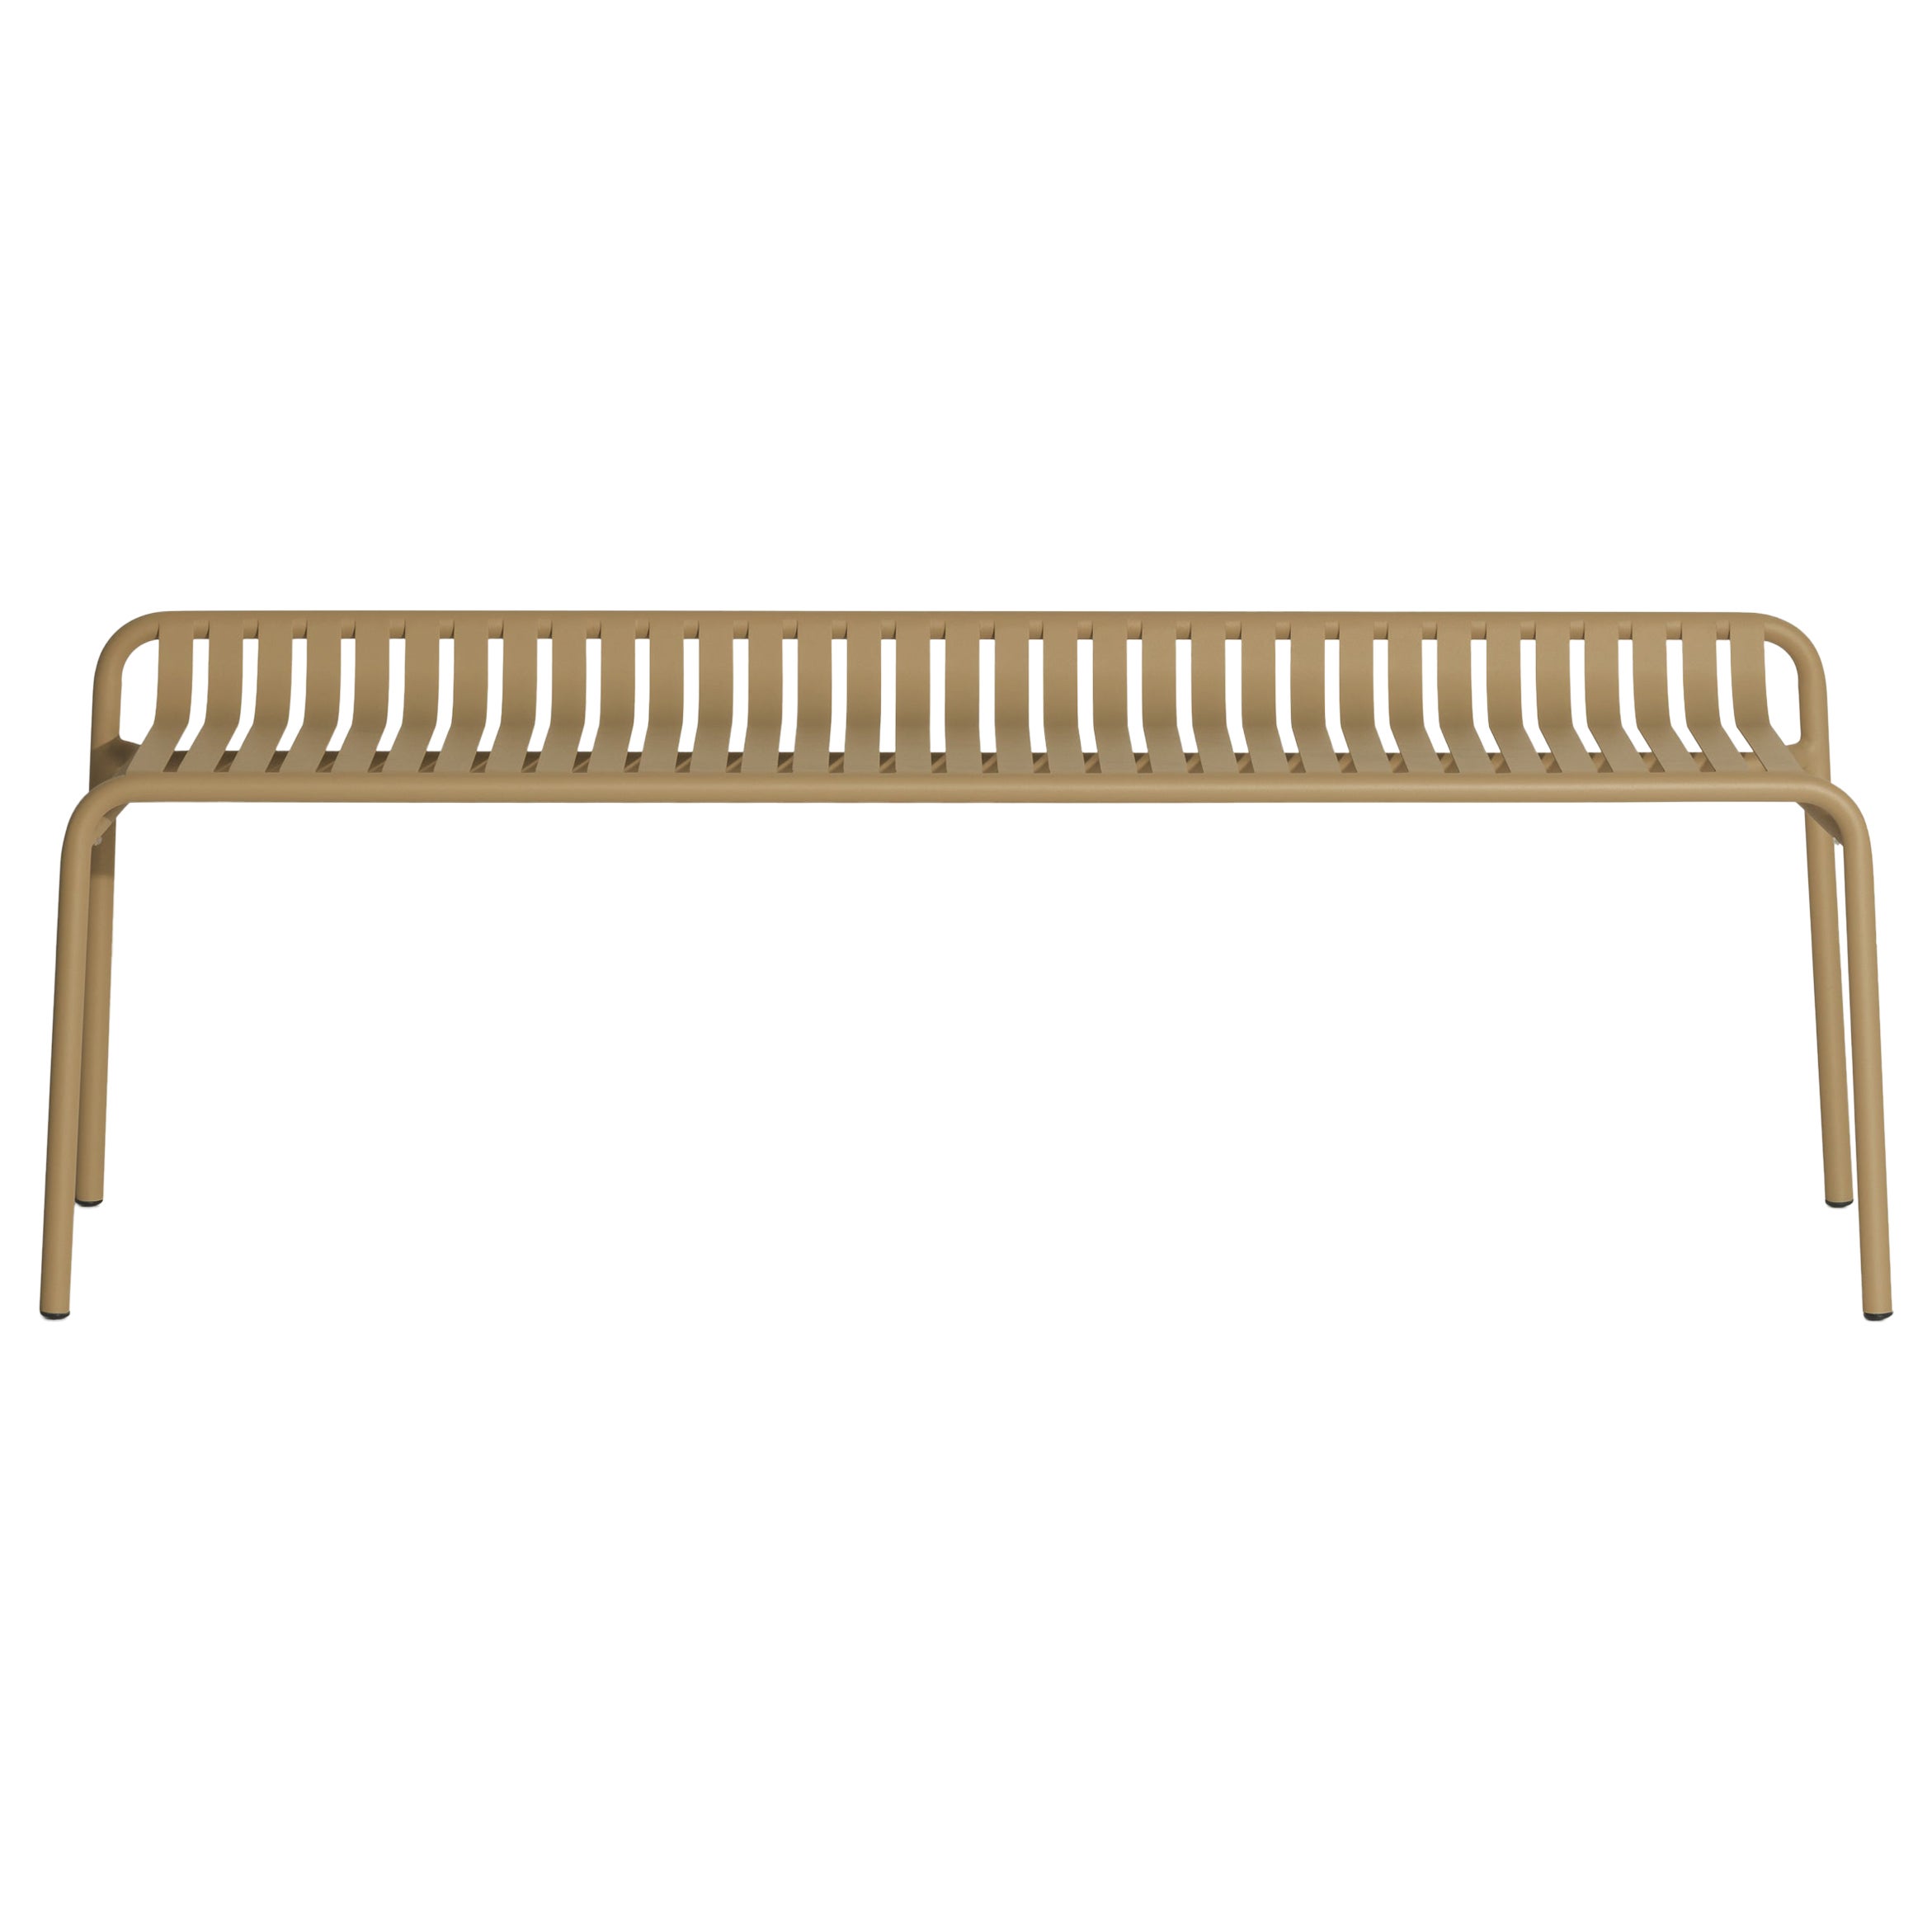 Petite Friture Week-End Bench without Back in Gold Aluminium, 2017 